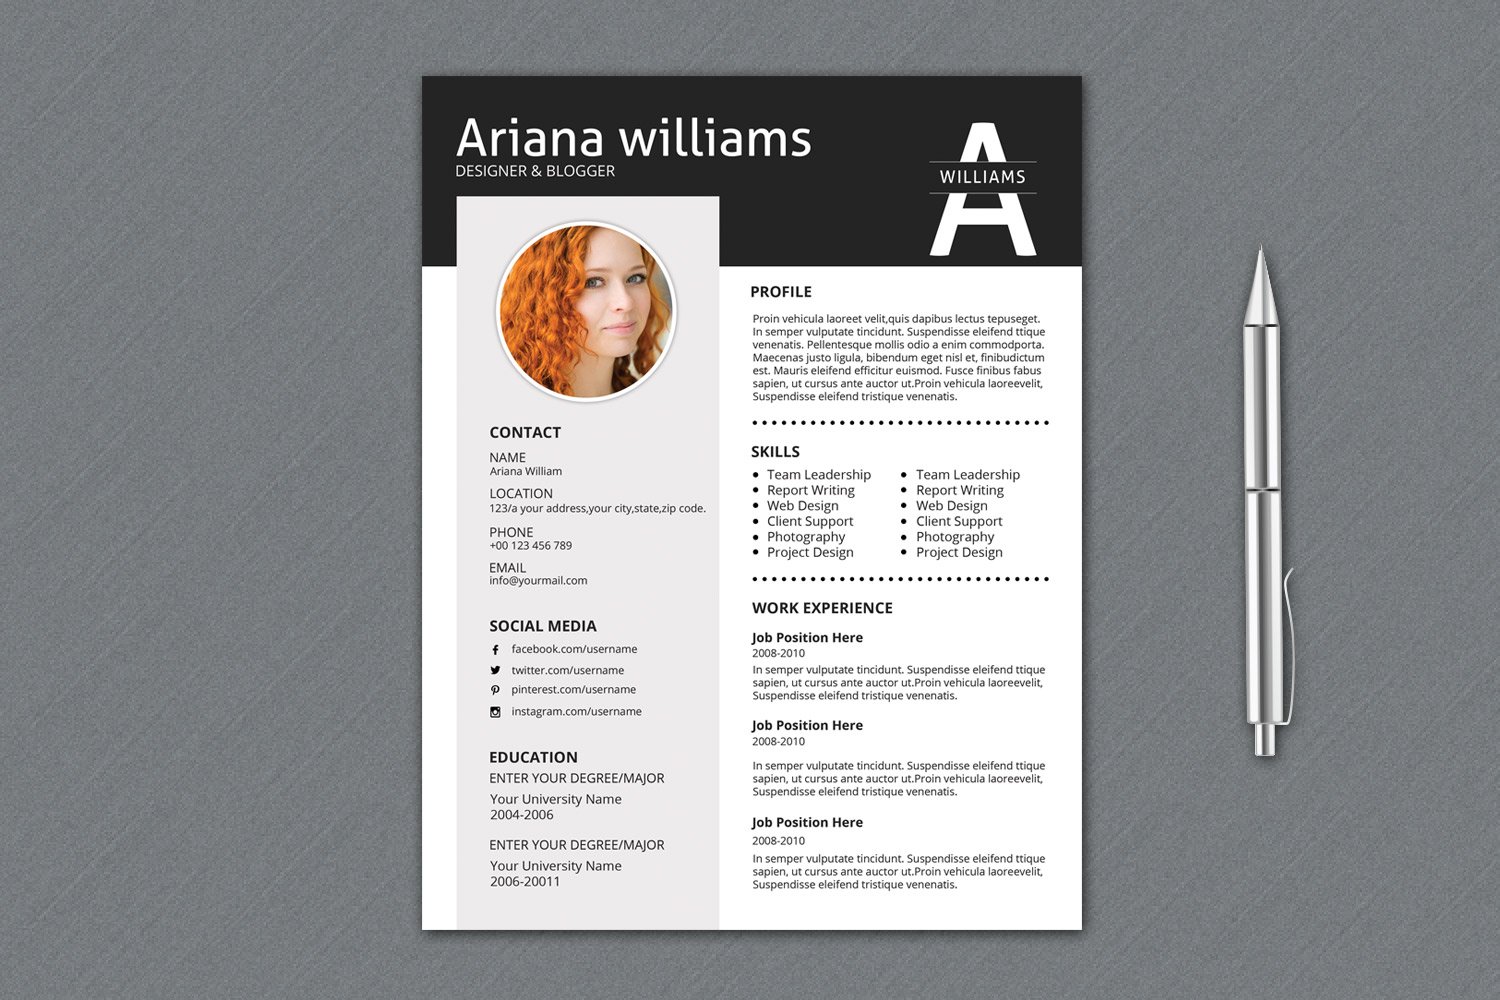 Professional Resume Template | V016 cover image.